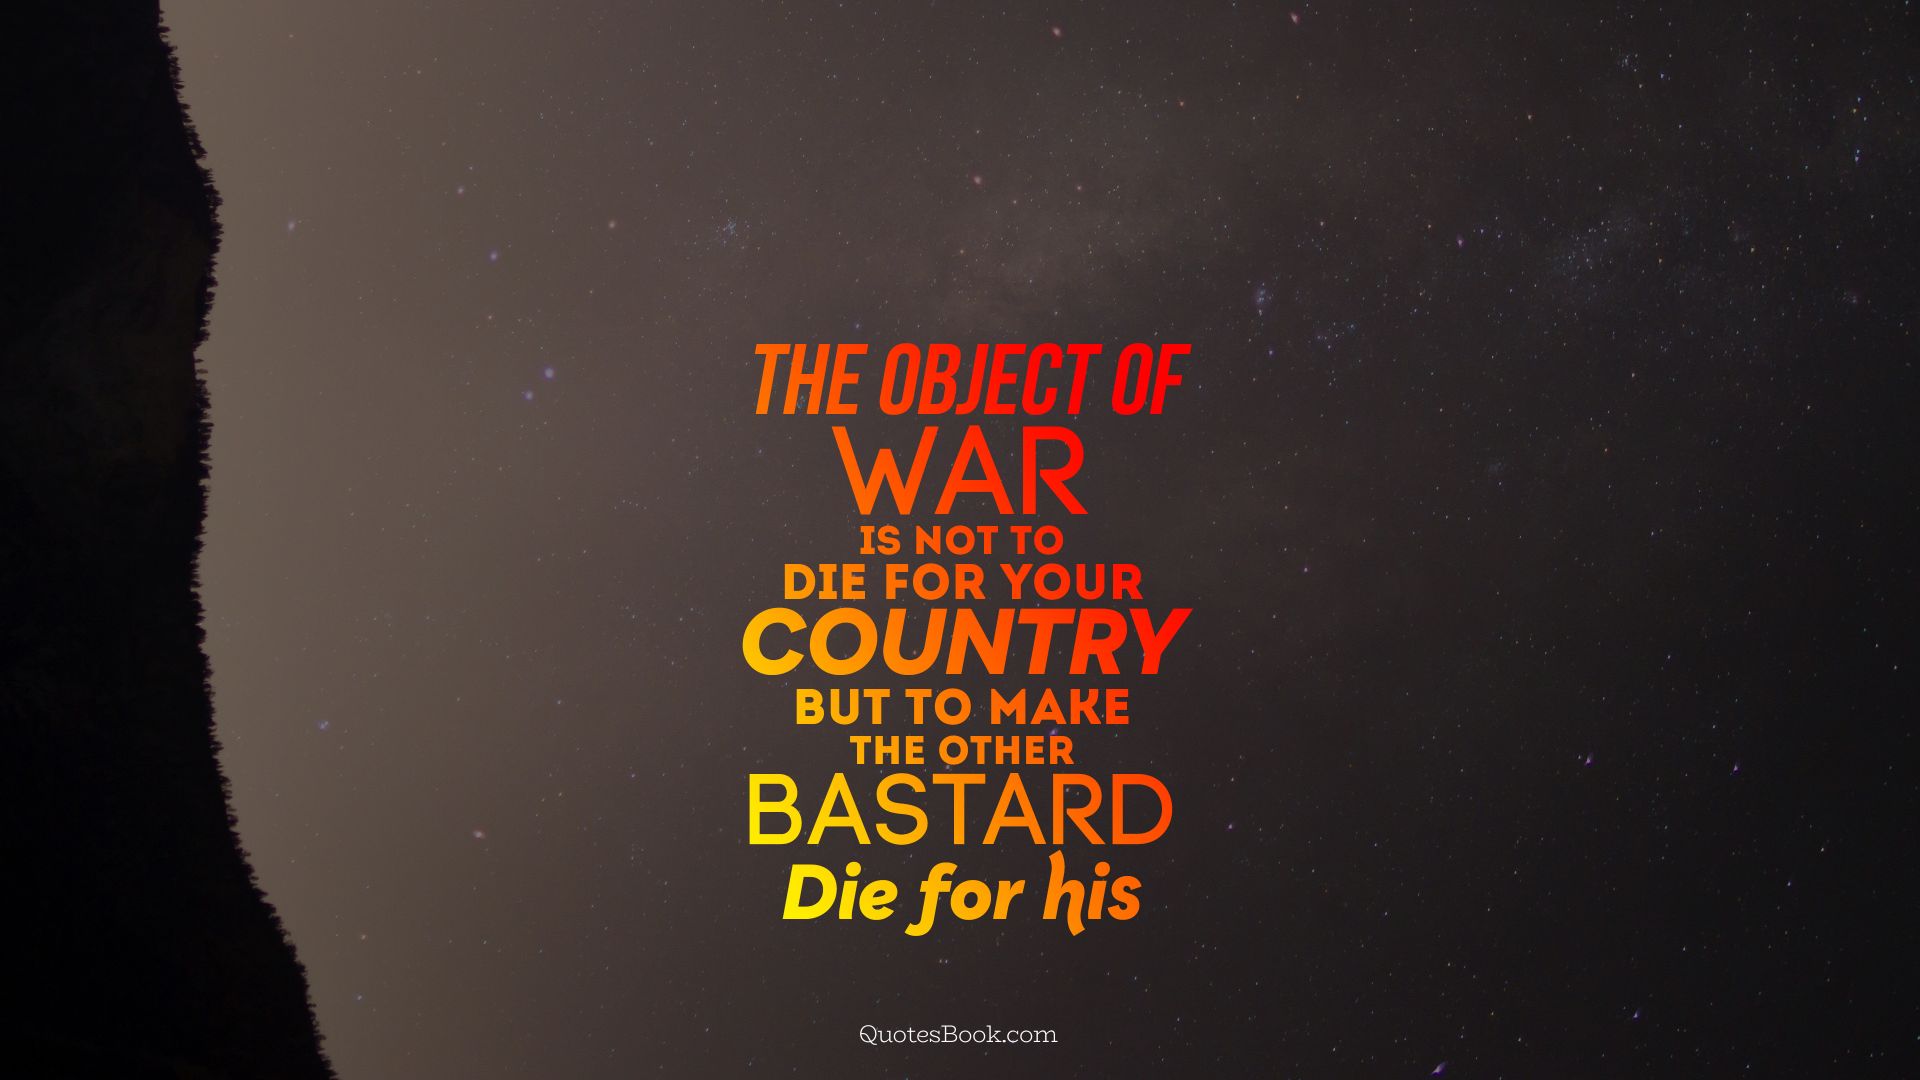 The object of war is not to die for your country but to make the other bastard die for his